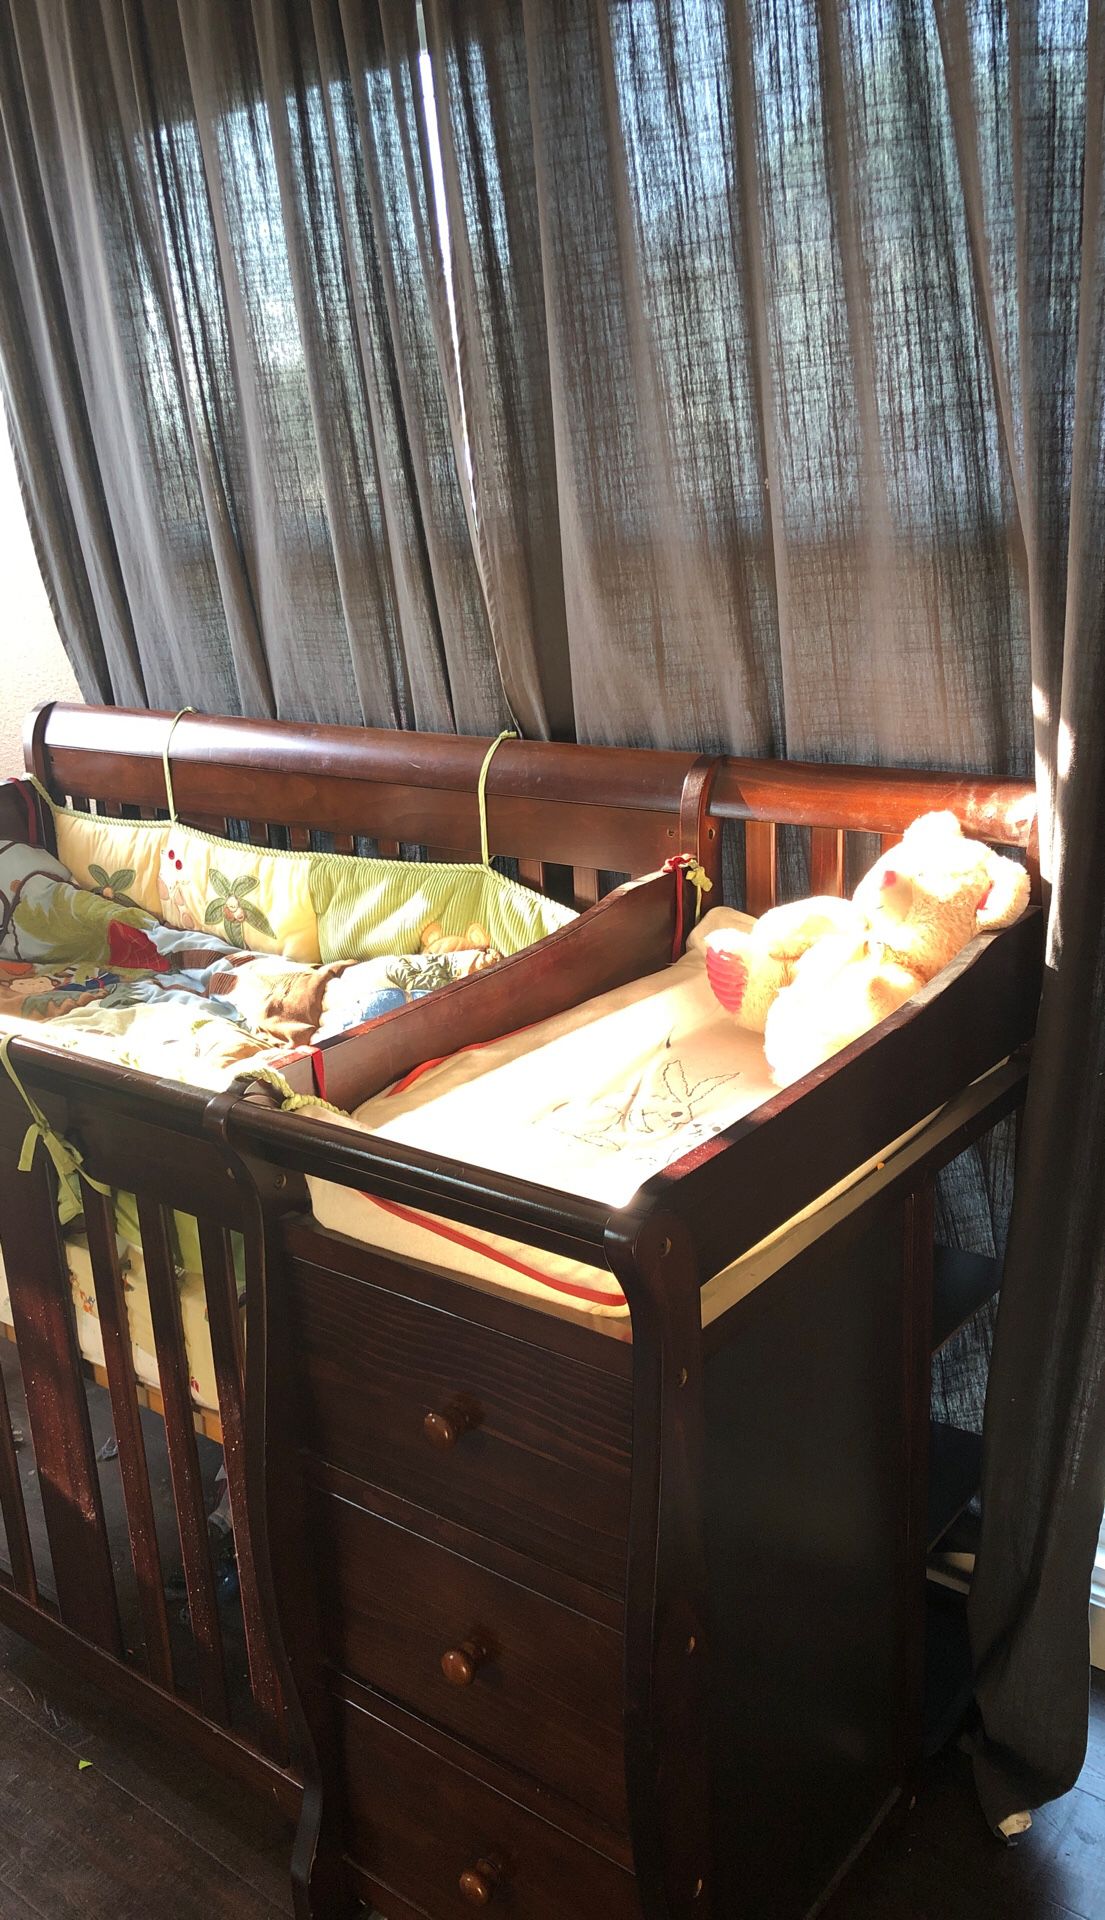 Crib for sale - used a few months